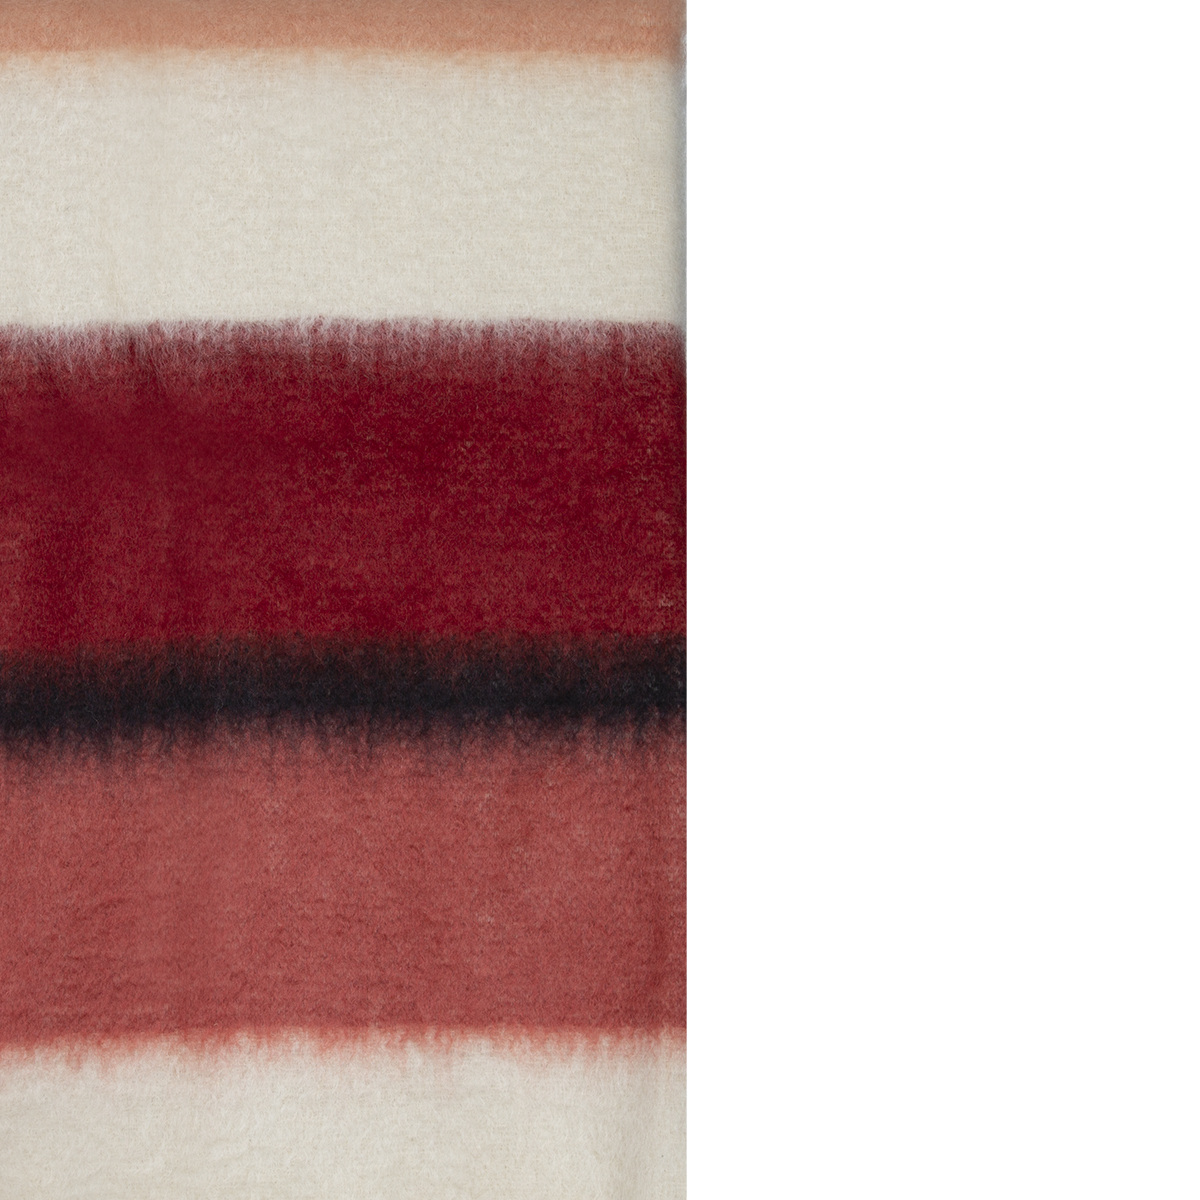 Plaid Serenity, Quetsche - L130 cm - Mohair / Wool - image 5